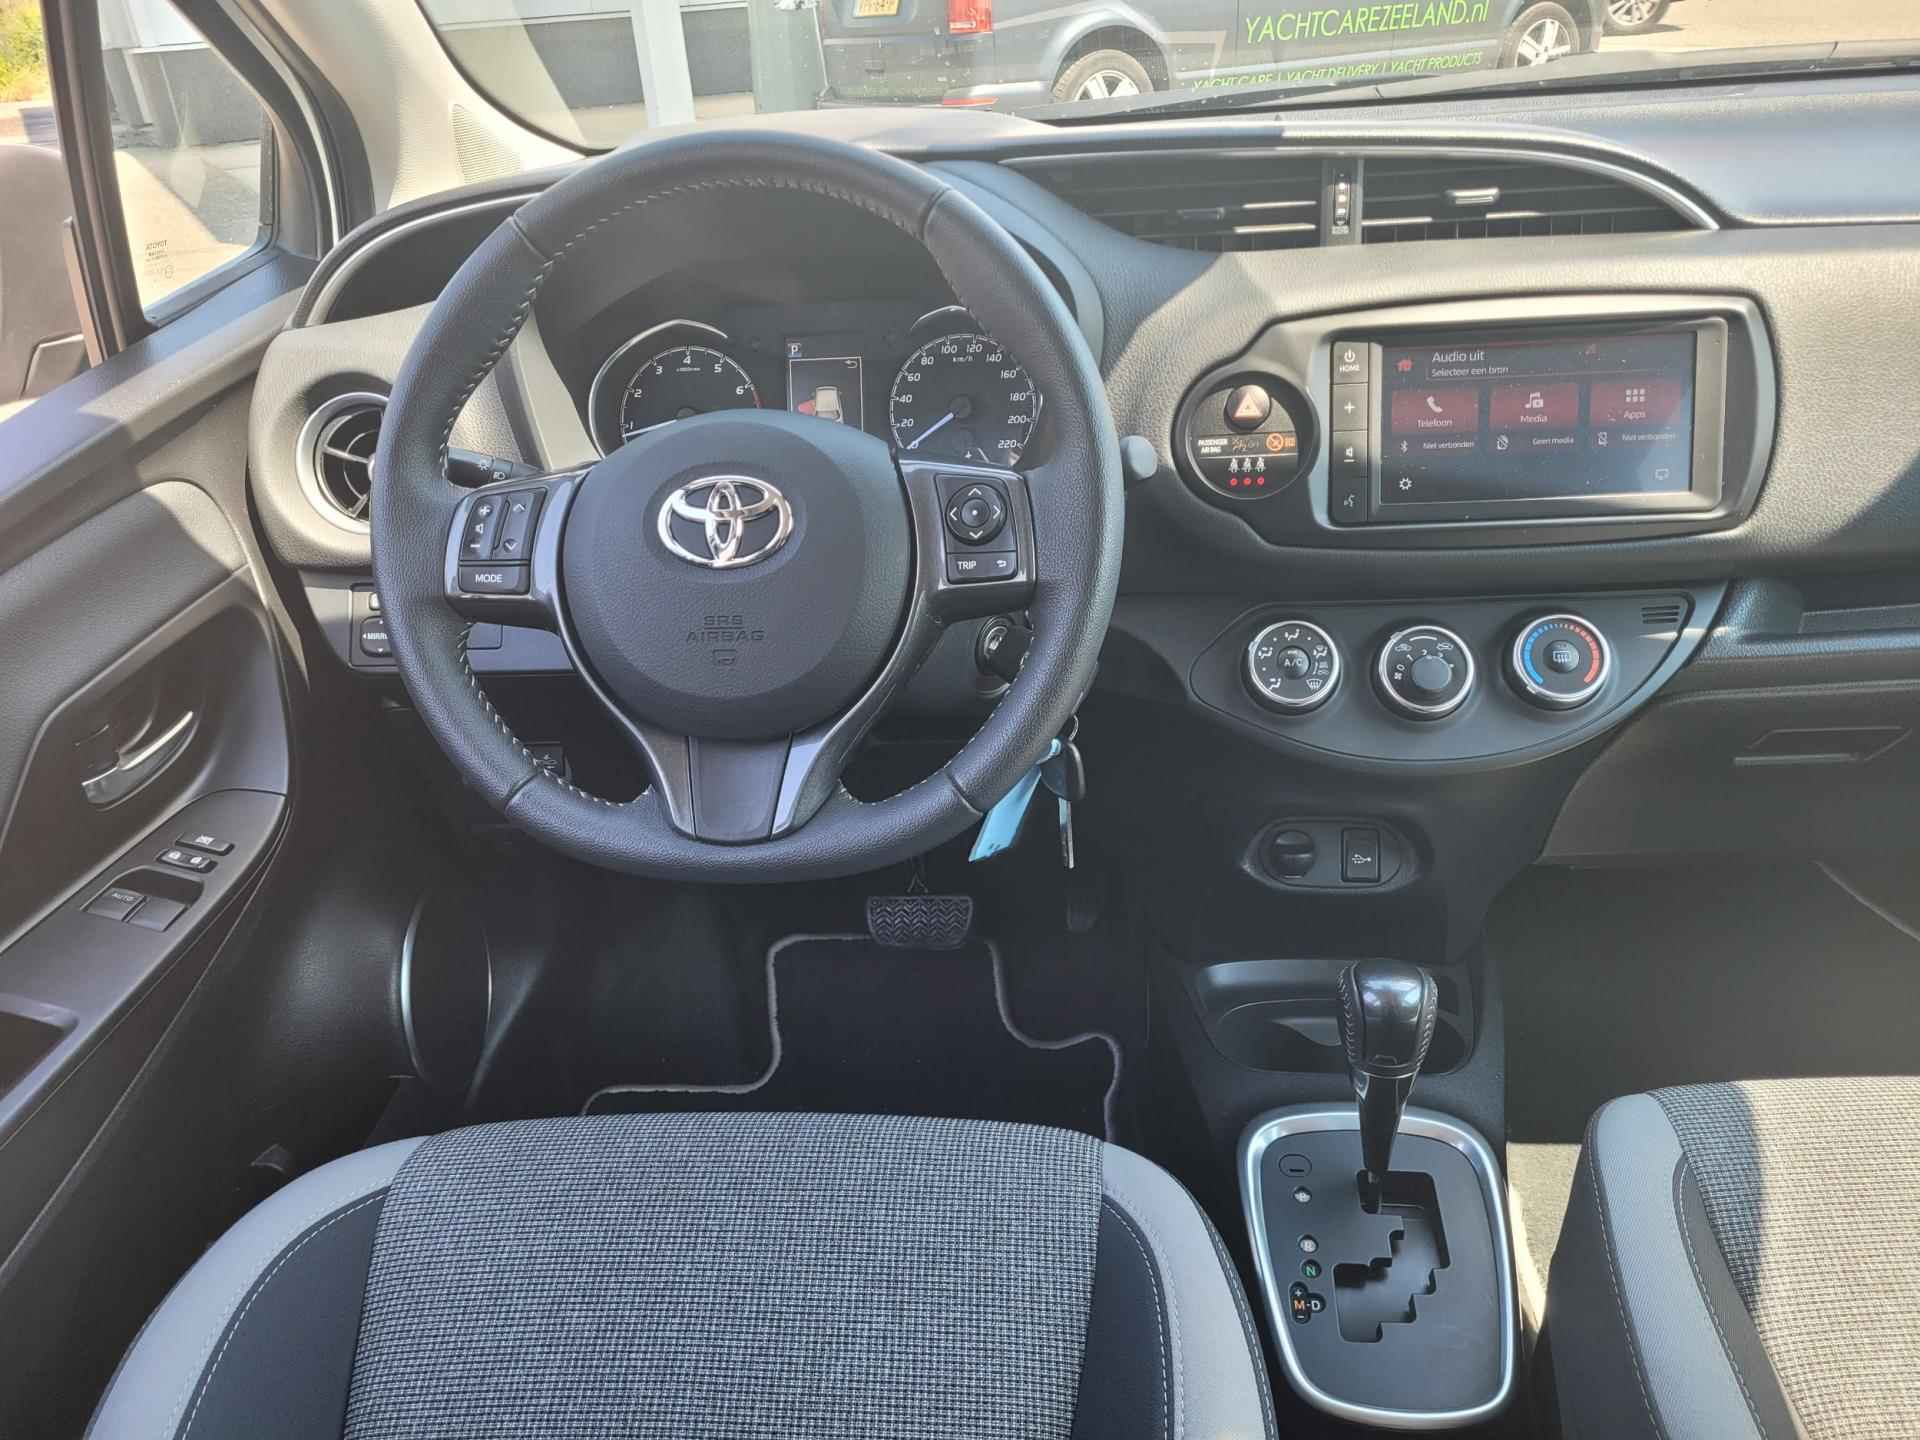 Toyota Yaris 1.5 VVT-i Dynamic Y20 AUTOMAAT / APPLE+ANDROID CAR PLAY / BTW Auto - 27/30